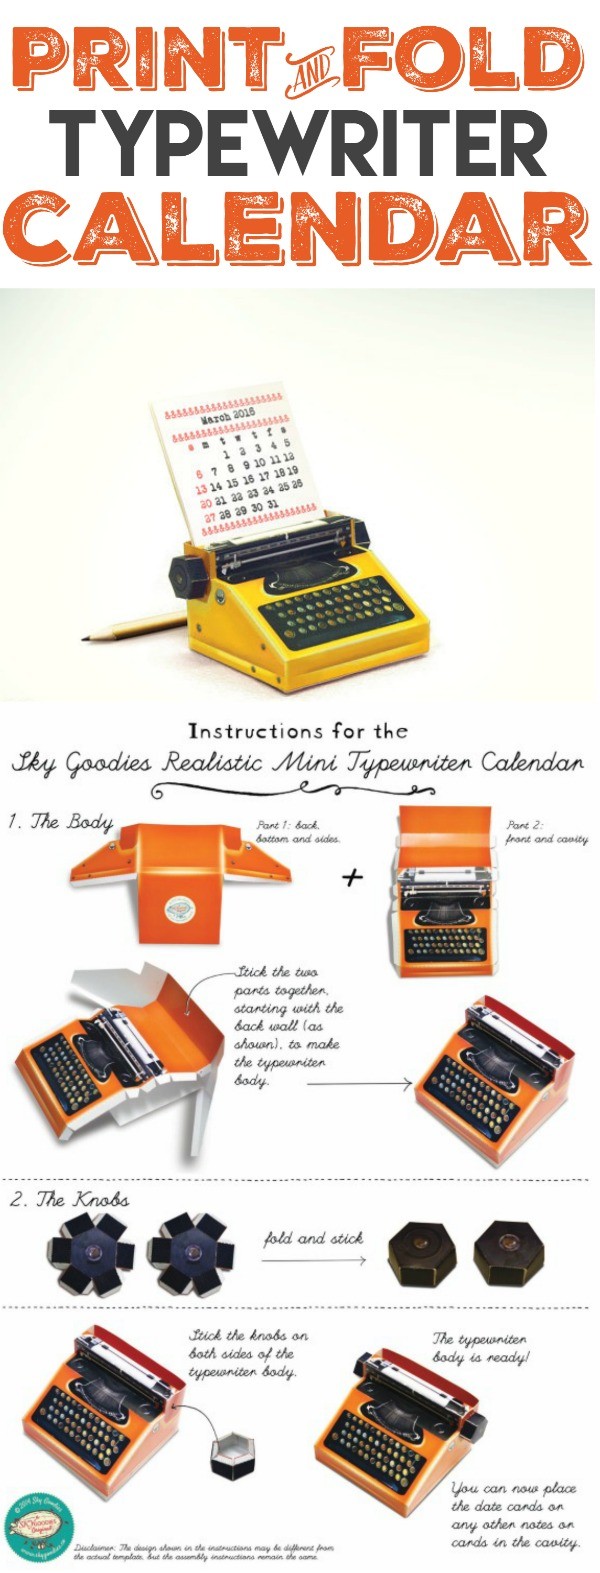 2016 Calendar | This free printable 2016 calendar will tickle the creative side! Print and Fold Typewriter with monthly date cards from SkyGoodies Etsy boutique. Get your free download from TodaysCreativeLife.com